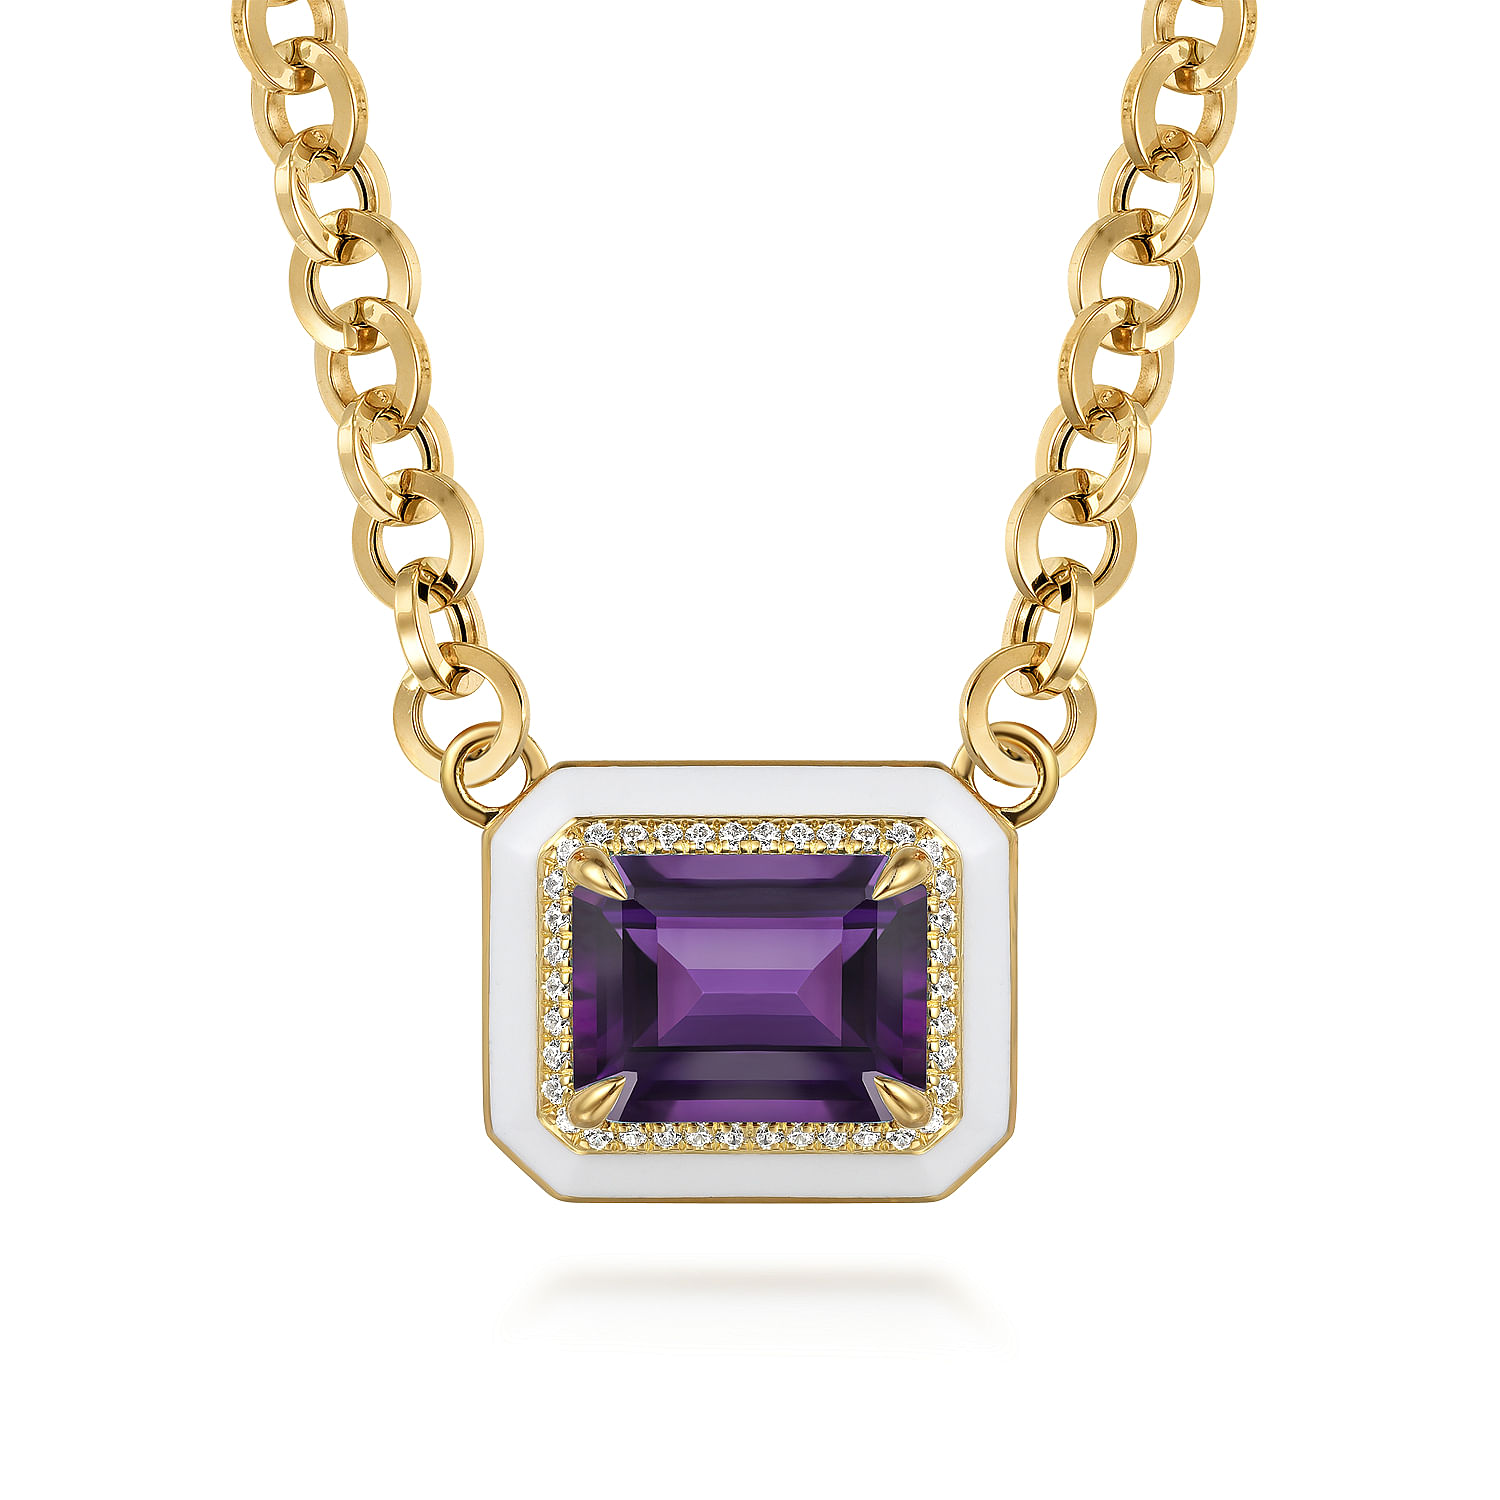 14K Yellow Gold Diamond and Amethyst Emerald Cut Necklace With Flower Pattern J-Back and White Enamel